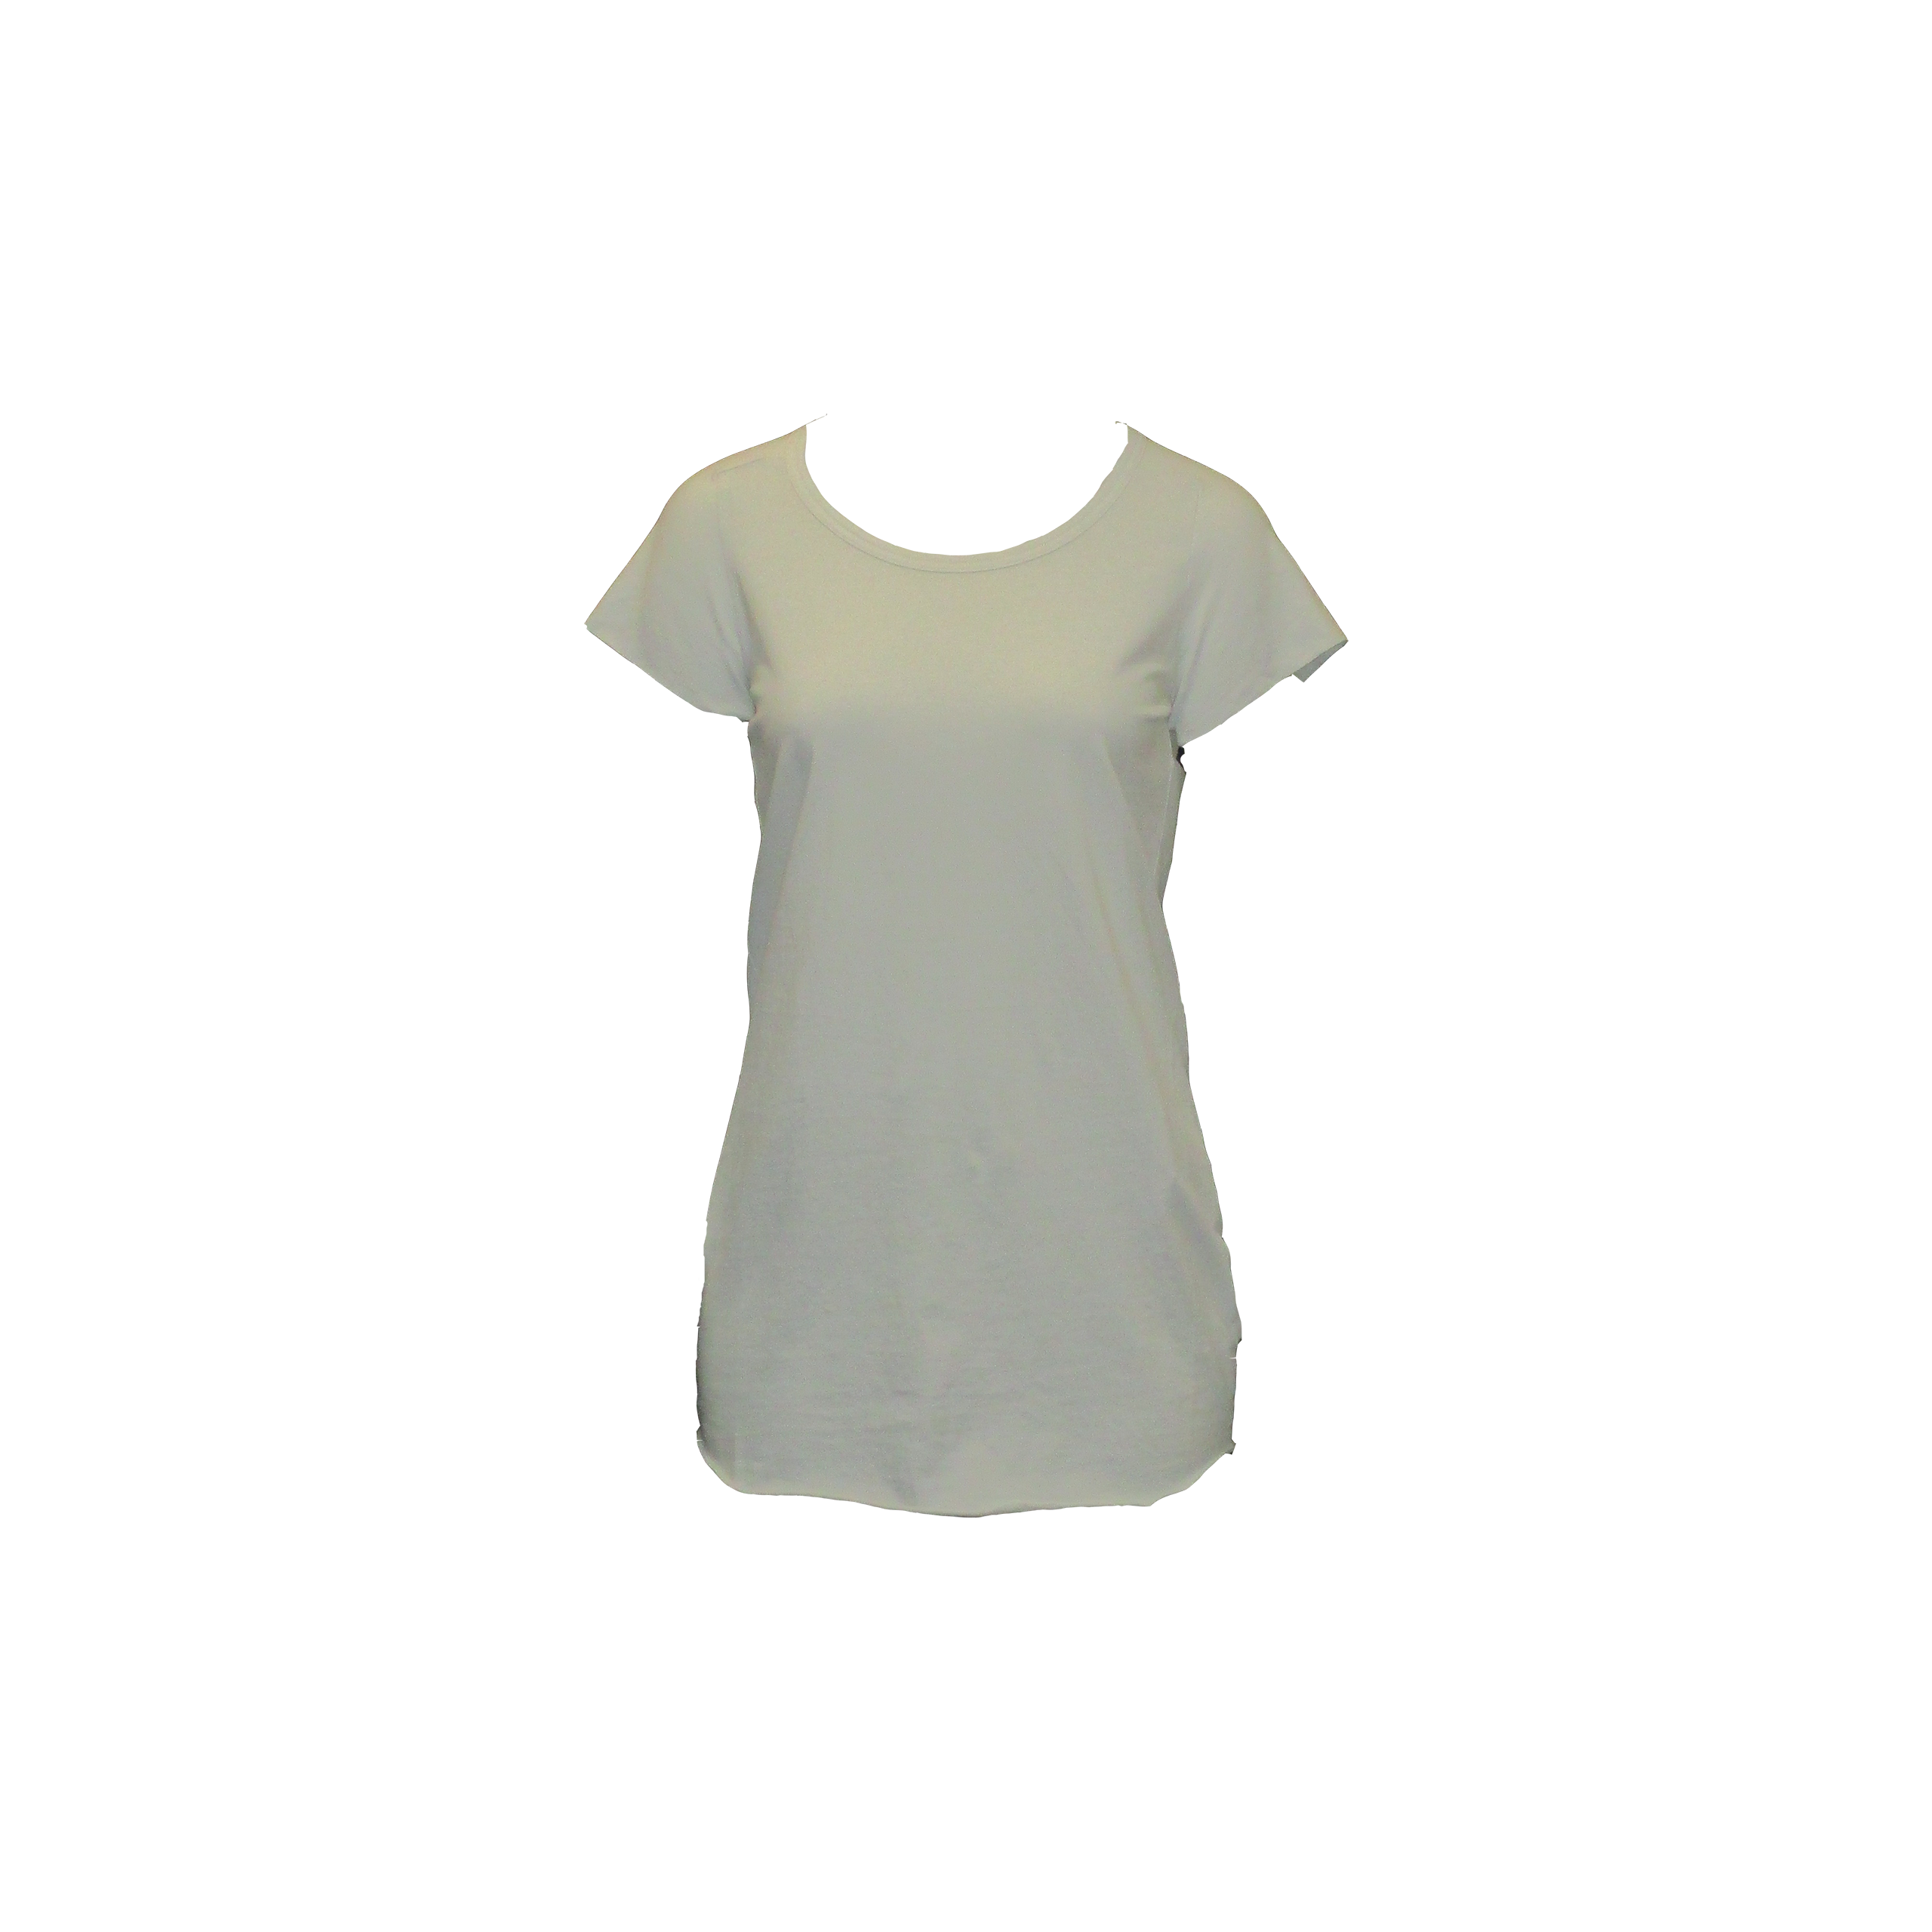 FITTED T-SHIRT, NESSEL - RUNDHOLZ